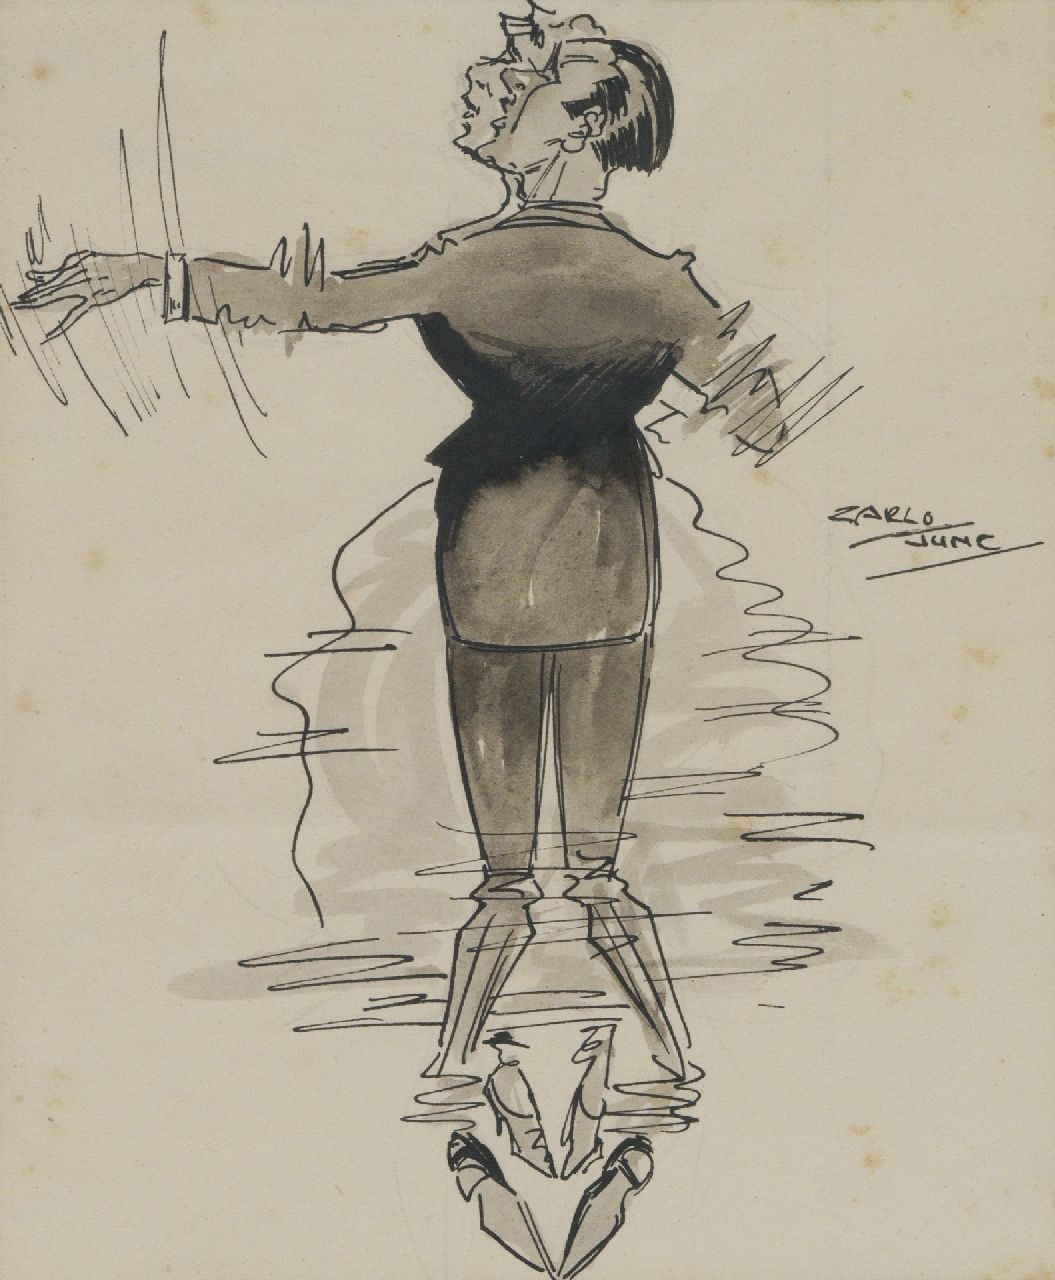 Jung C.H.  | Carel Hendrik 'Carlo' Jung | Watercolours and drawings offered for sale | Latest fashion, Indian ink on paper 21.0 x 17.0 cm, signed c.r.